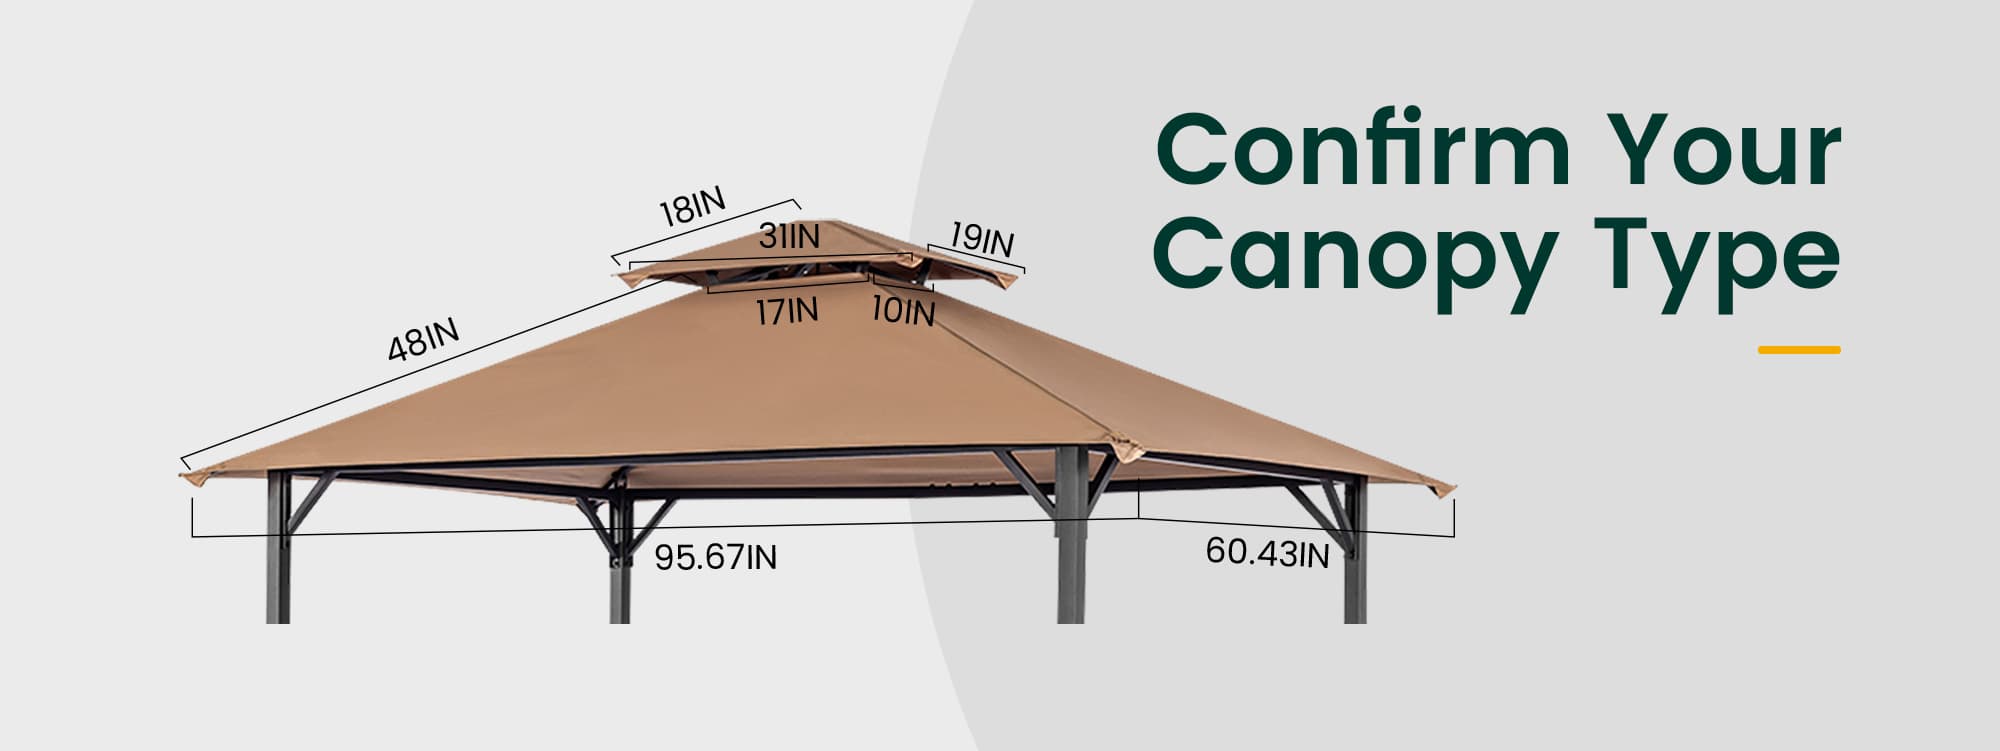 confirm your canopy type for your grill gazebo